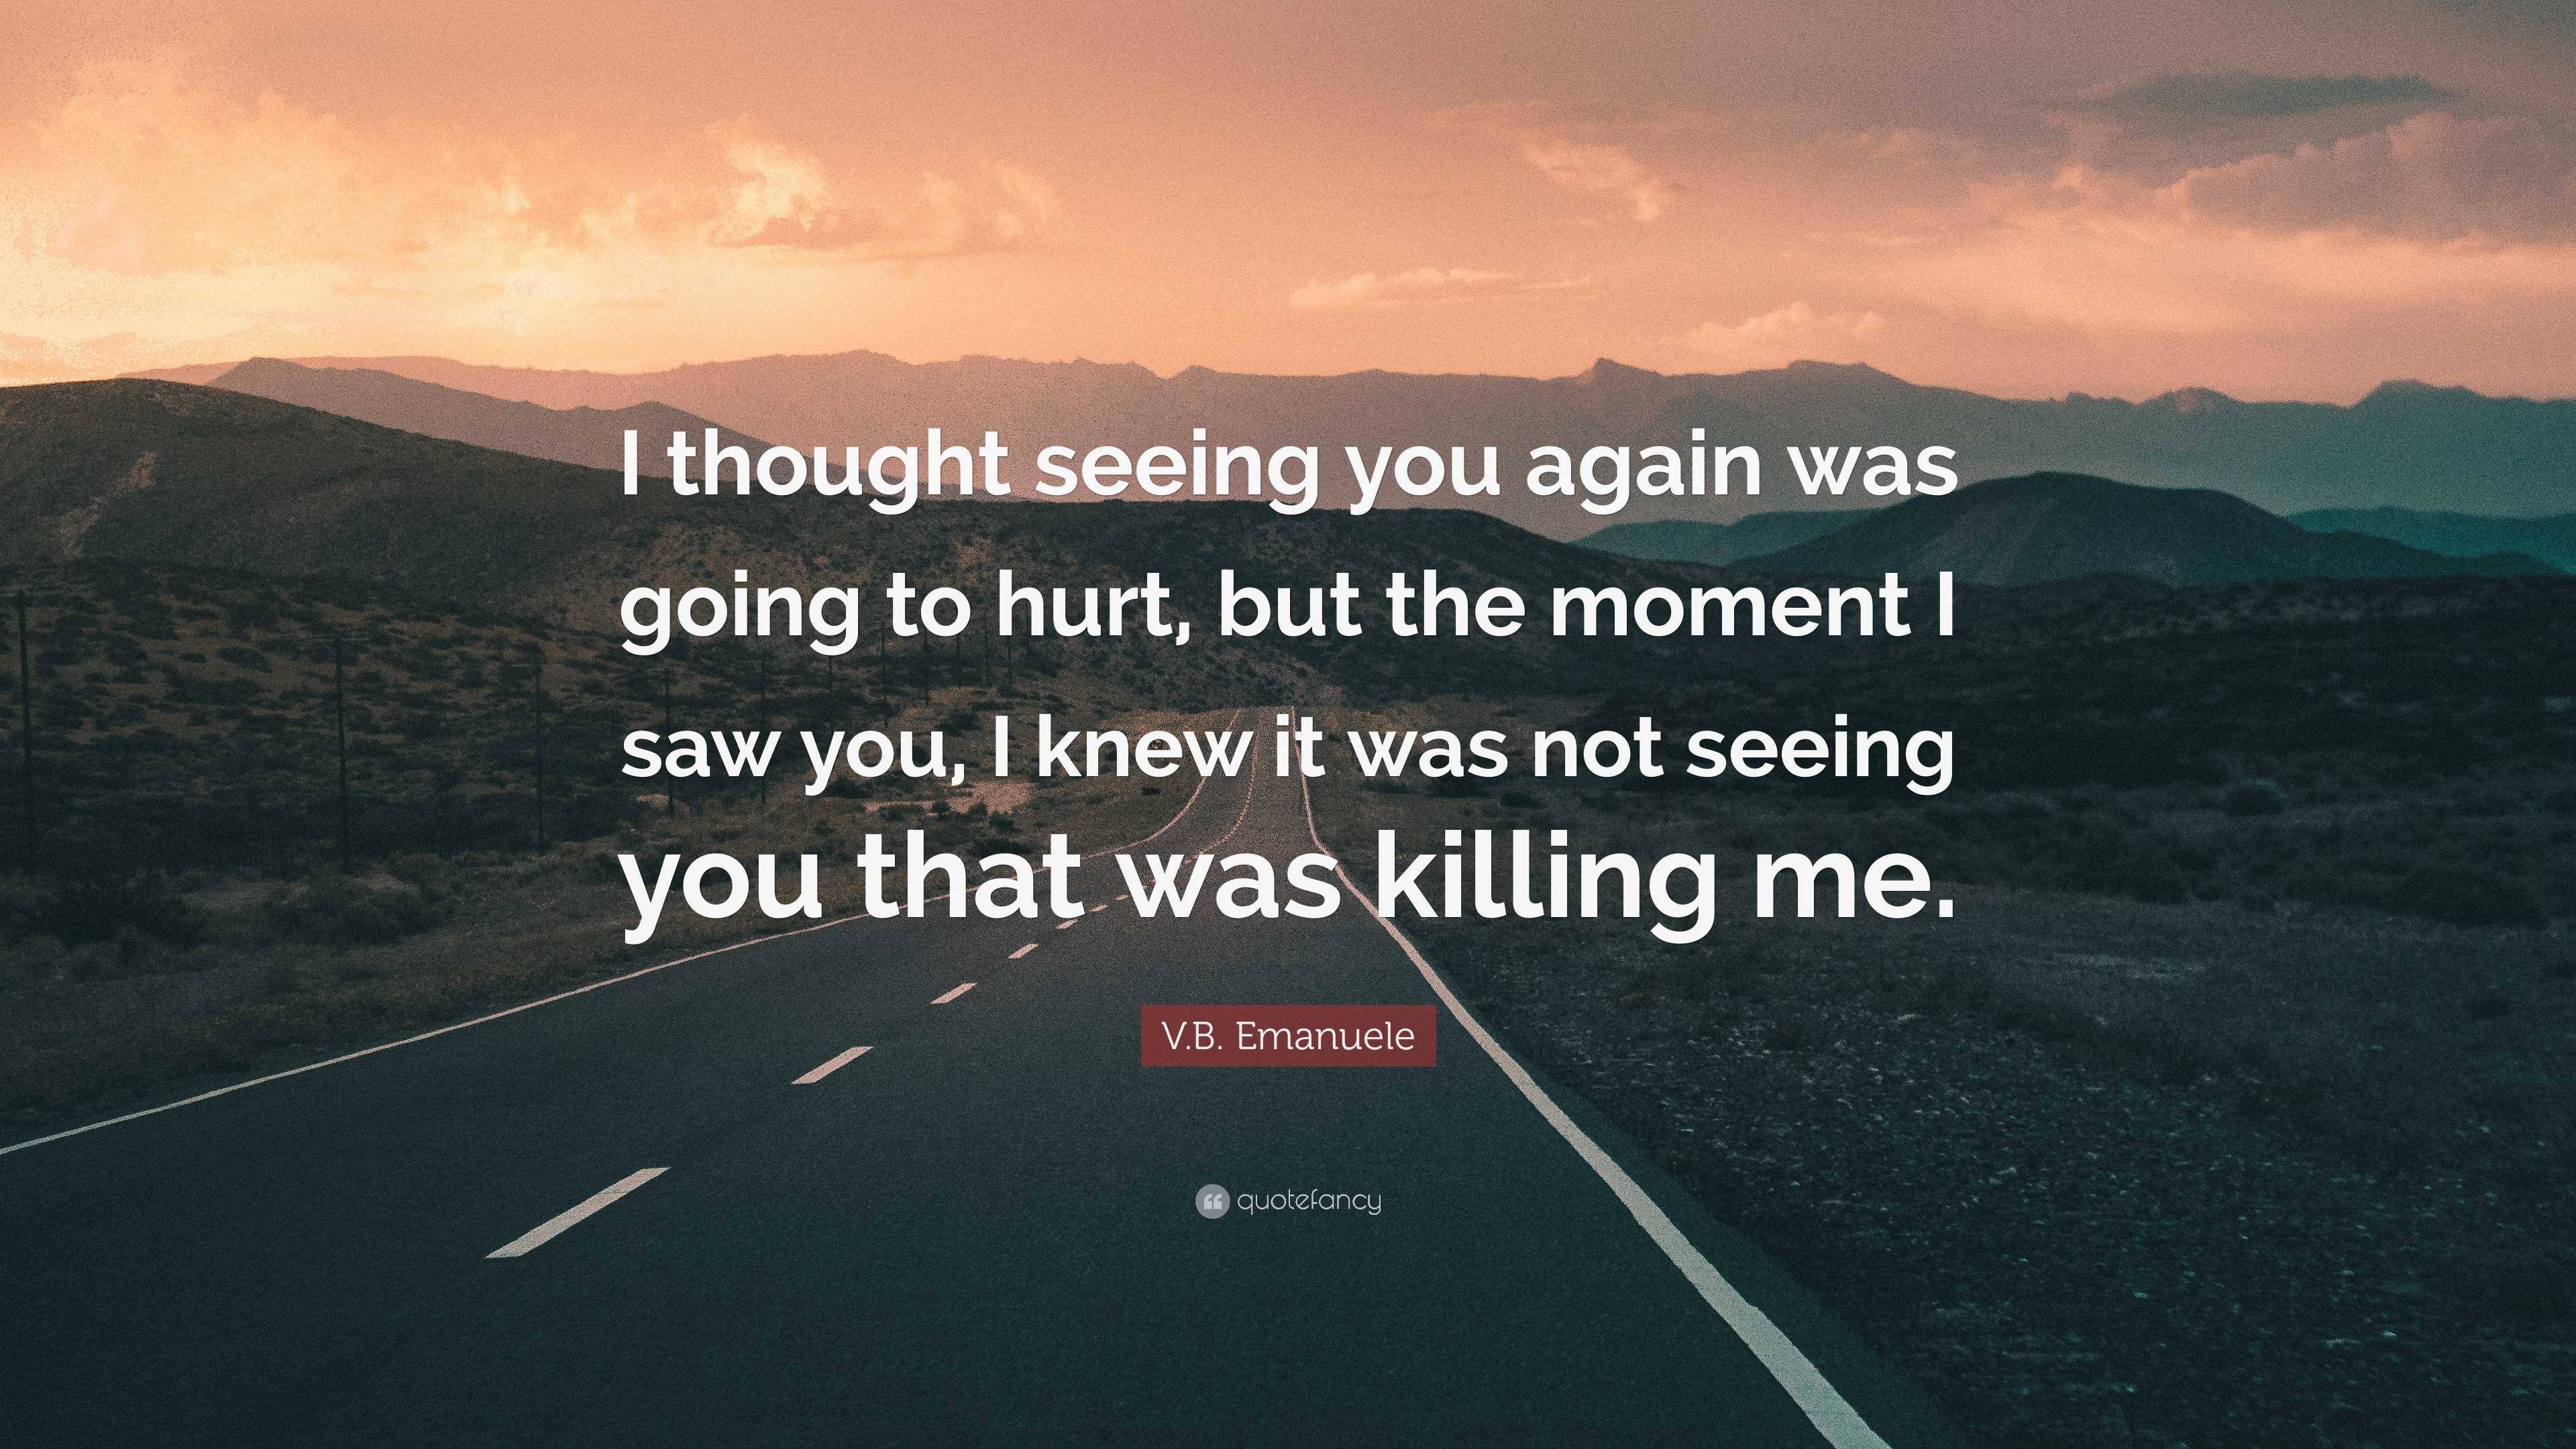 V.B. Emanuele Quote: “I thought seeing you again was going to hurt, but ...